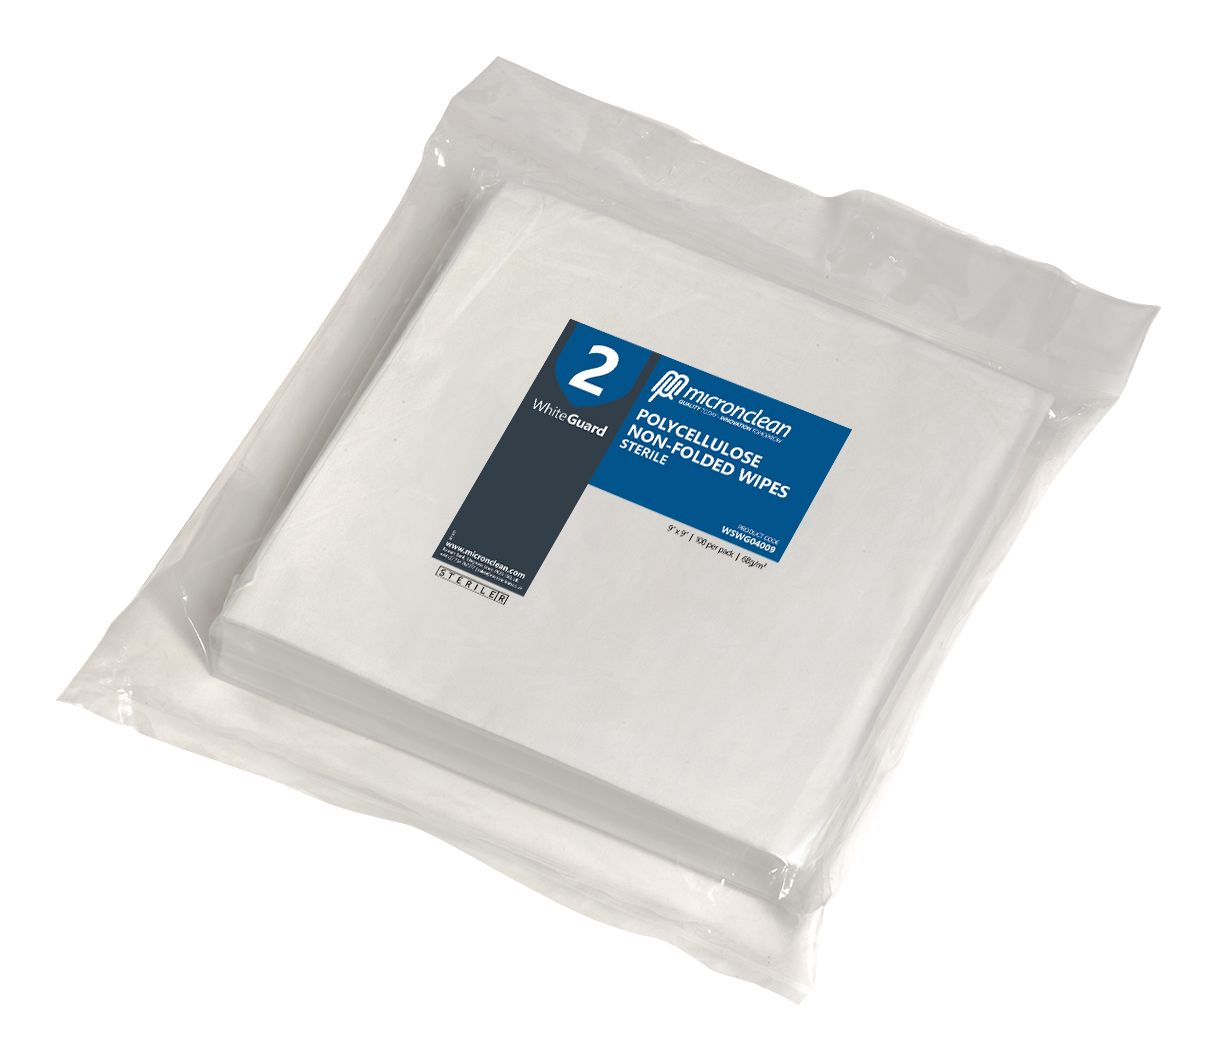 WhiteGuard 2 Polycellulose Wipes Sterile [ROW]